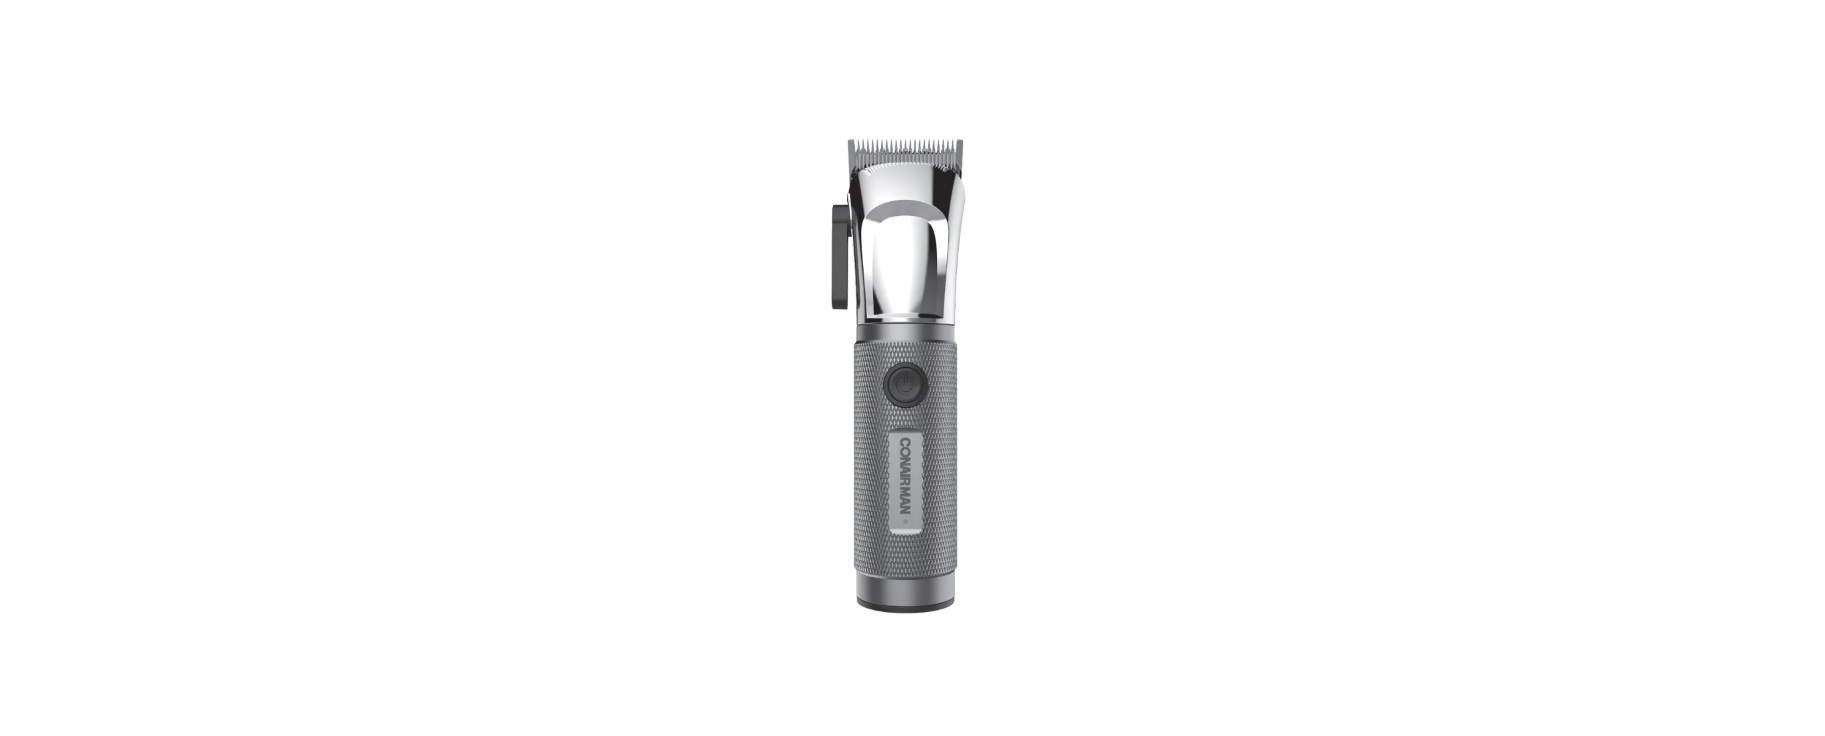 You are currently viewing CONAIR HC6500 MAN Precision Cut Clipper User Manual